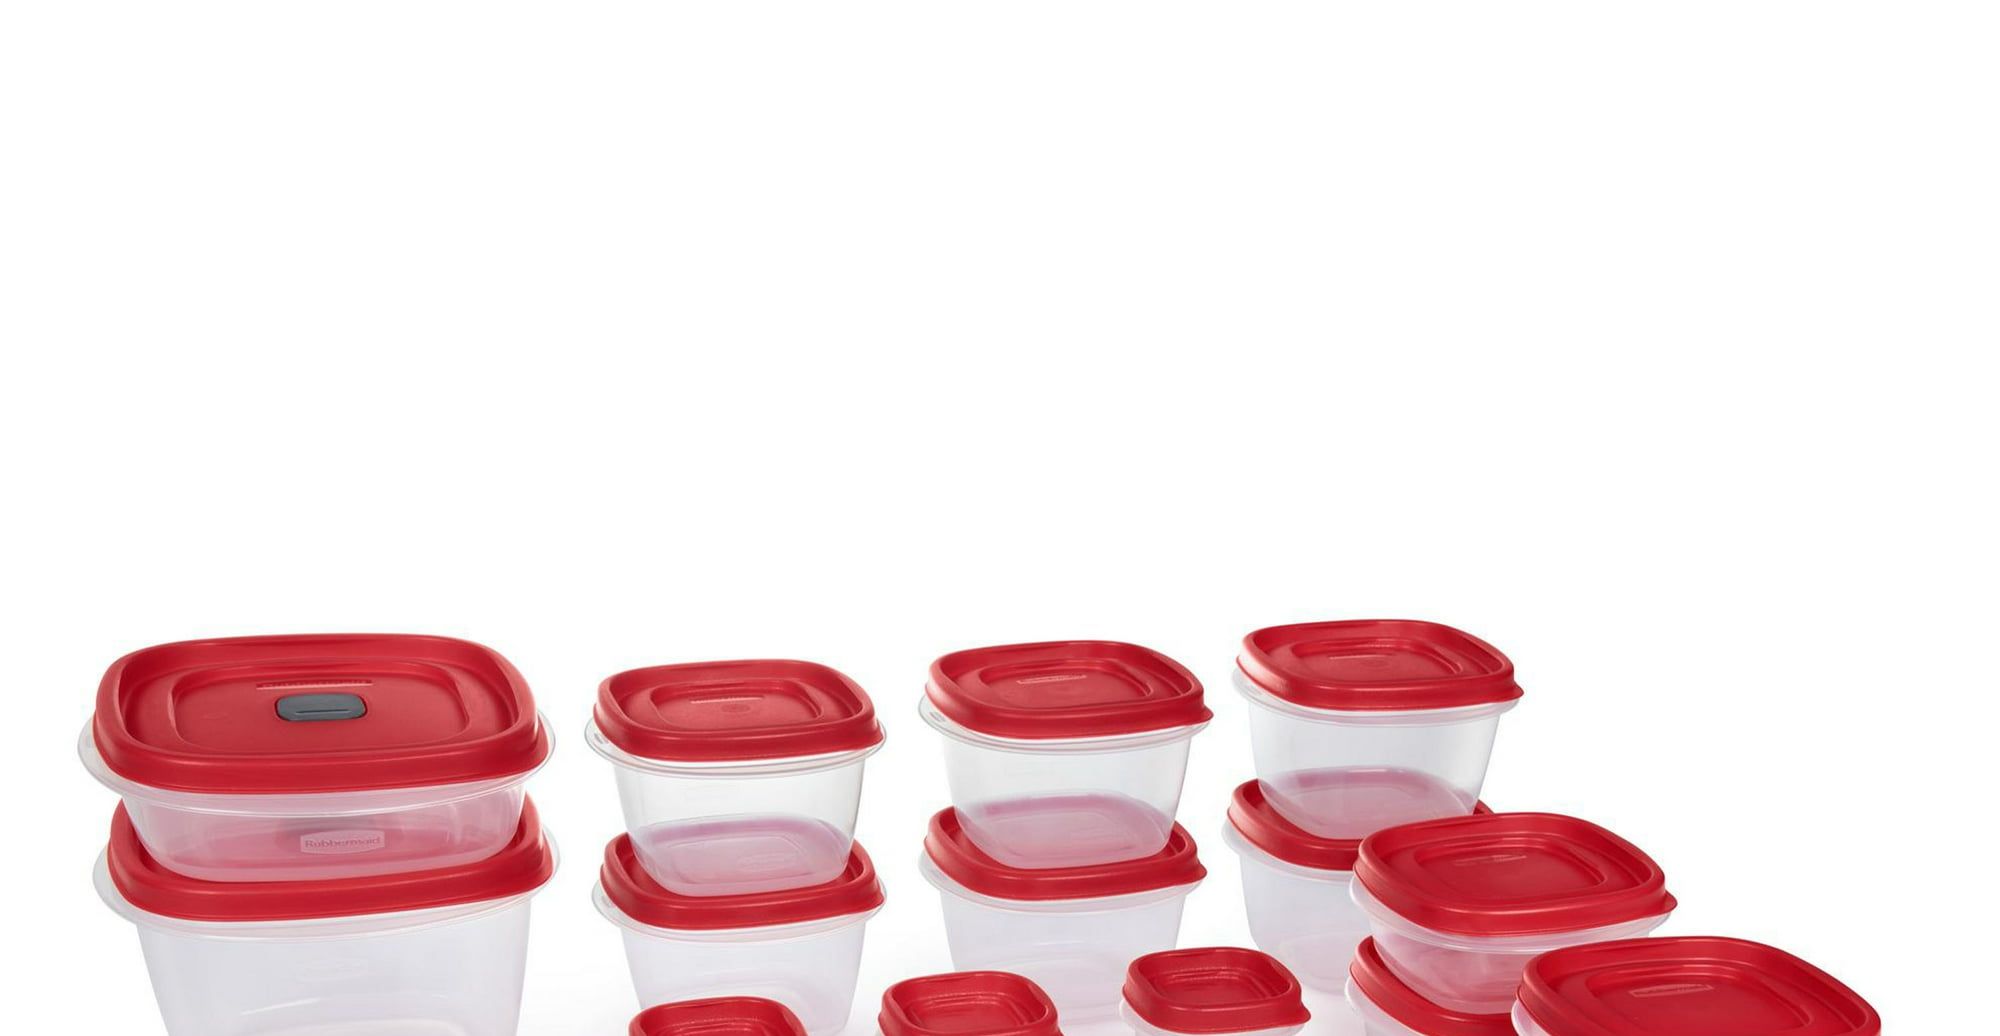 https://hips.hearstapps.com/vader-prod.s3.amazonaws.com/1700853957-Rubbermaid-Easy-Find-Vented-Lids-Food-Storage-Containers-38-Piece-Set-Red_7140a56e-c5a5-49f3-95a4-87122a6b6598.57ef98e6b5c4459b0a894aeaf8602e8a.jpg?crop=1xw:0.518xh;0xw,0.237xh